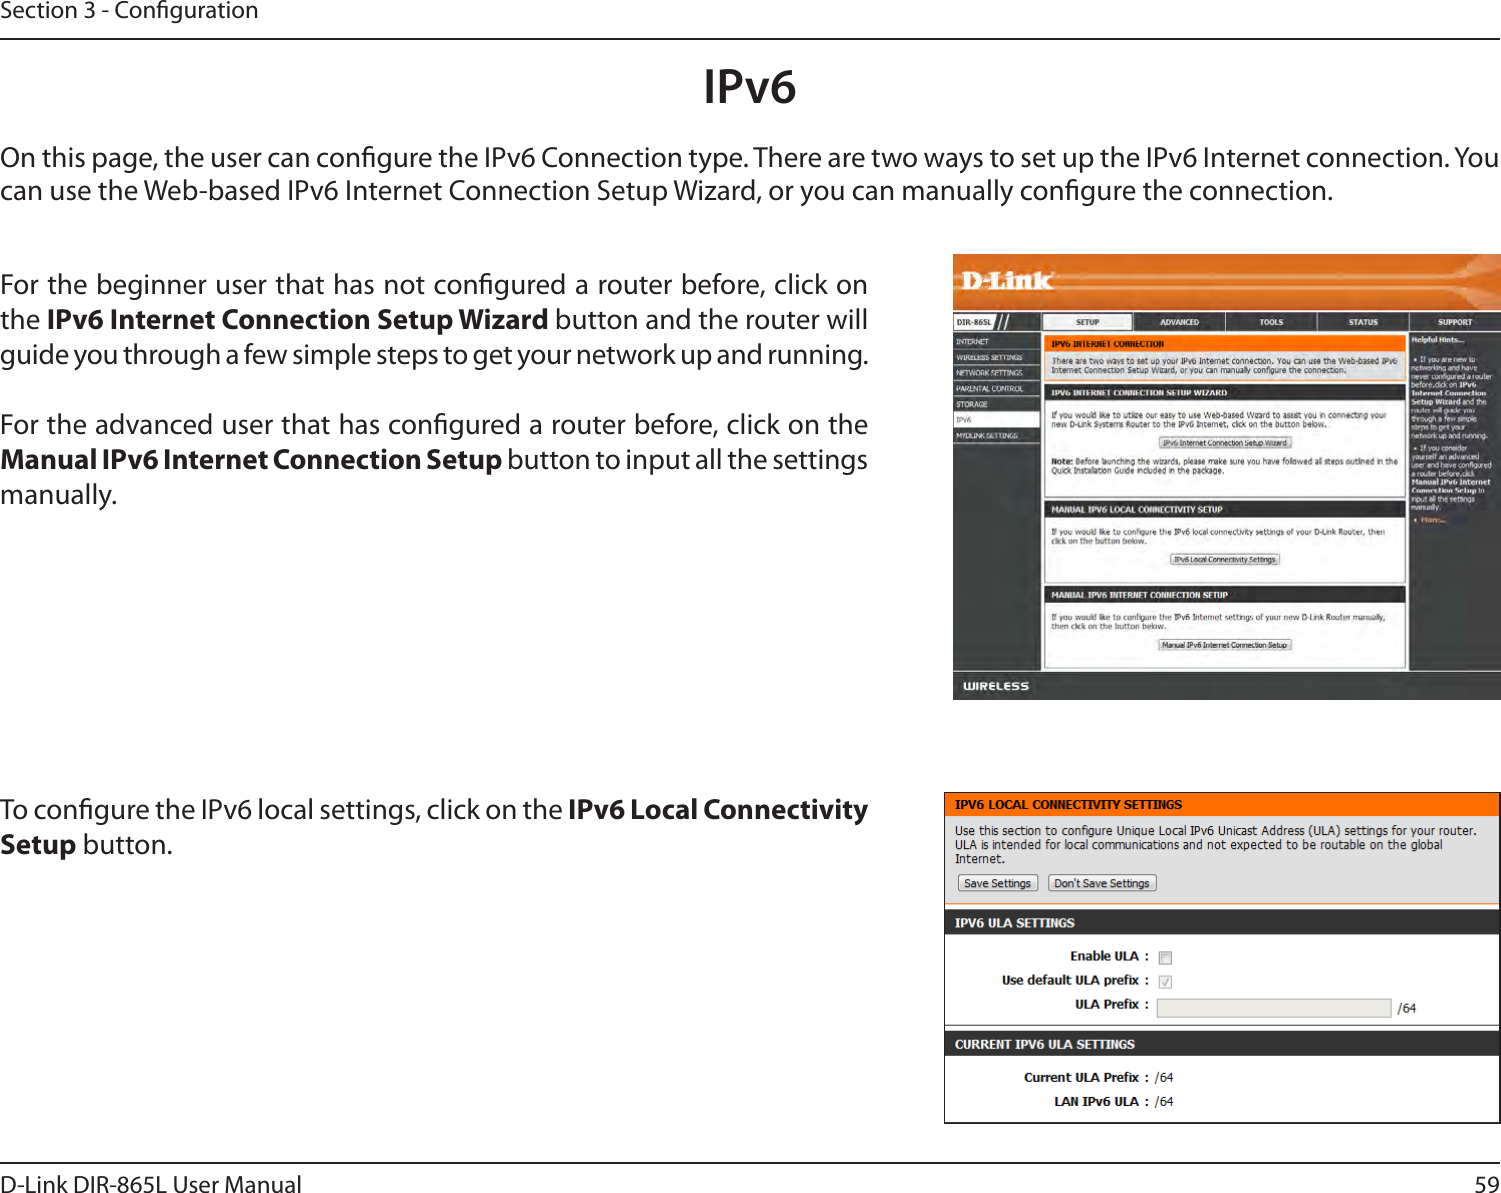 59D-Link DIR-865L User ManualSection 3 - CongurationIPv6On this page, the user can congure the IPv6 Connection type. There are two ways to set up the IPv6 Internet connection. You can use the Web-based IPv6 Internet Connection Setup Wizard, or you can manually congure the connection.For the beginner user that has not congured a router before, click on the IPv6 Internet Connection Setup Wizard button and the router will guide you through a few simple steps to get your network up and running.For the advanced user that has congured a router before, click on the Manual IPv6 Internet Connection Setup button to input all the settings manually.To congure the IPv6 local settings, click on the IPv6 Local Connectivity Setup button.